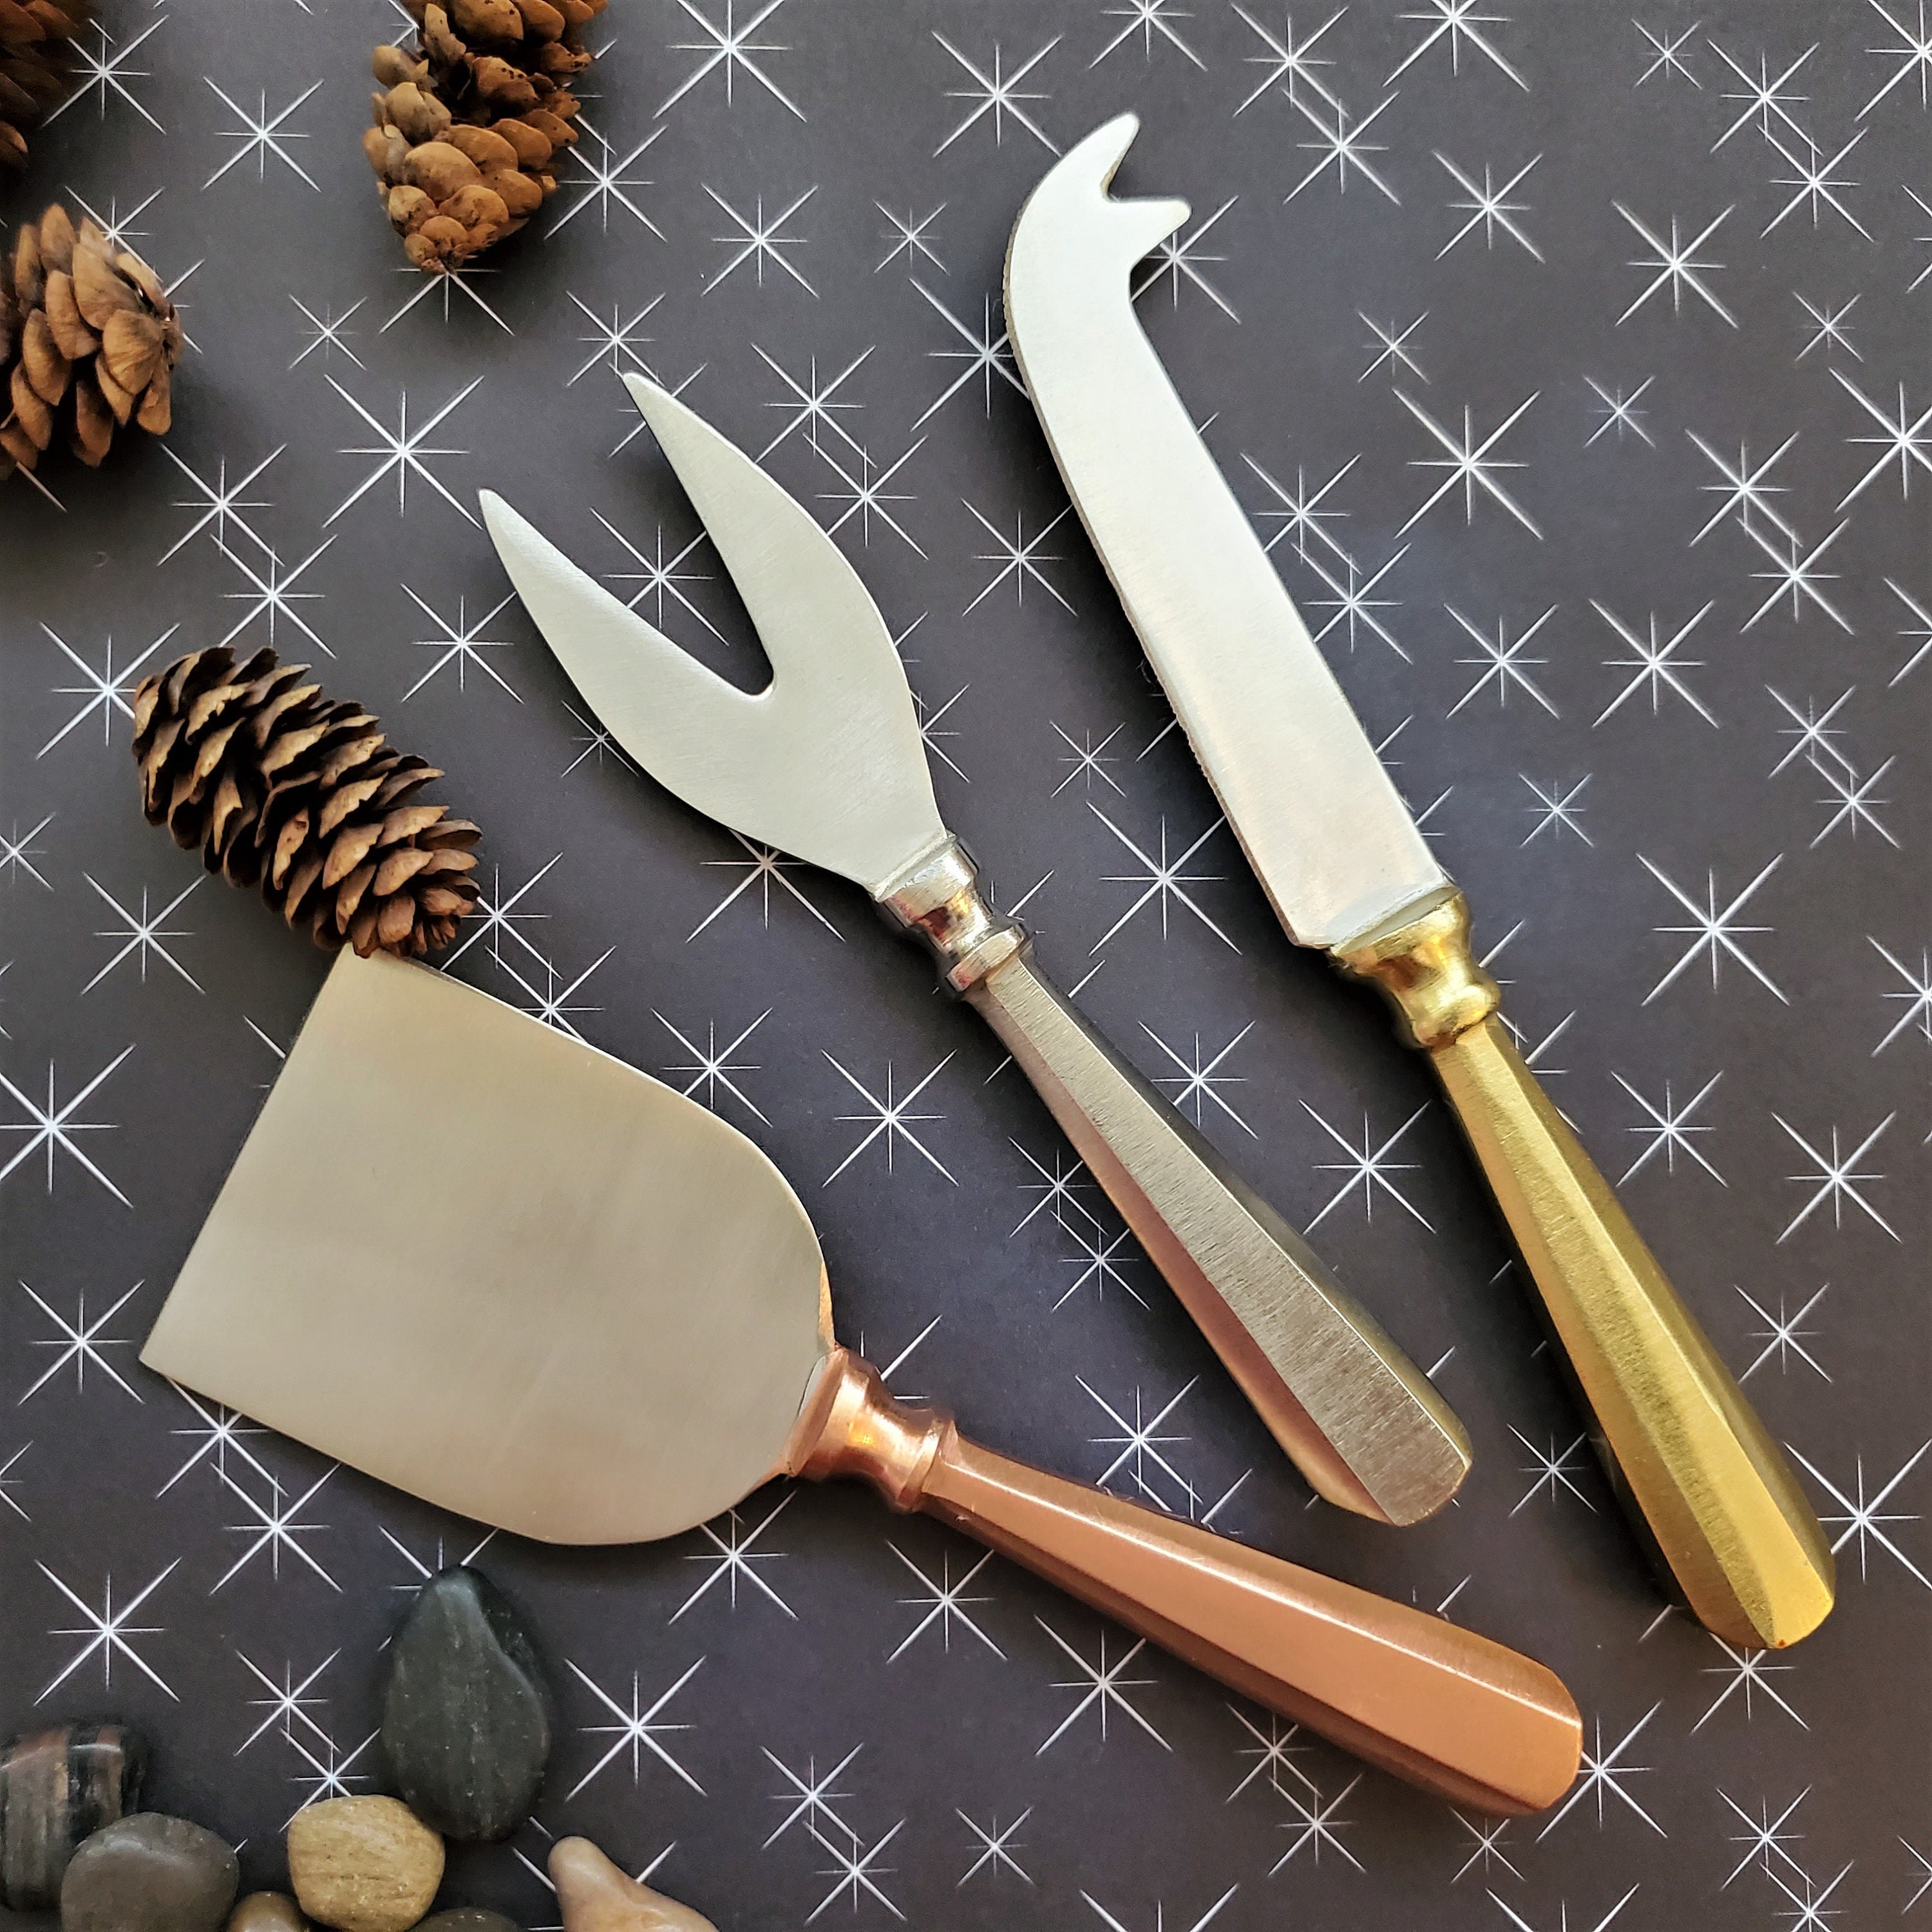 Artisan Forged Cheese Knives - Set of 4 - Beech